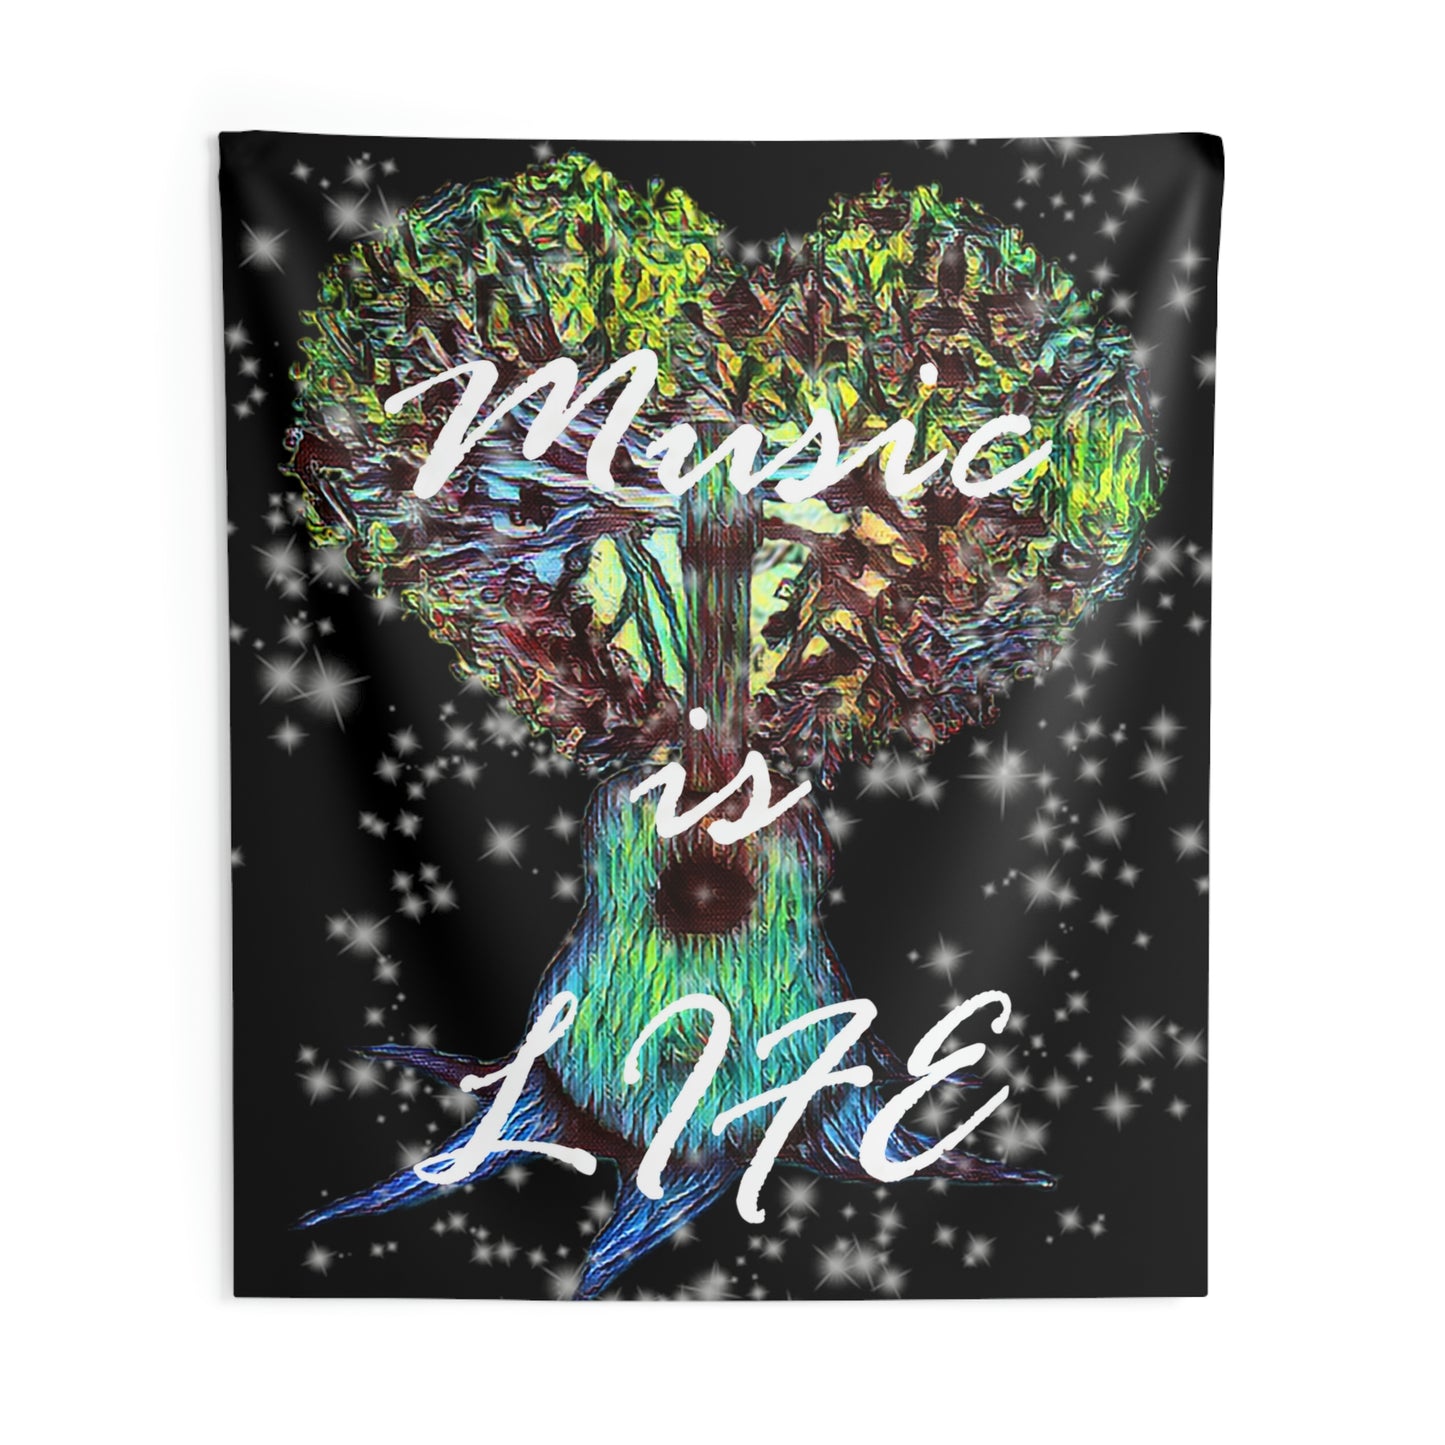 Music Is Life Wall Tapestries